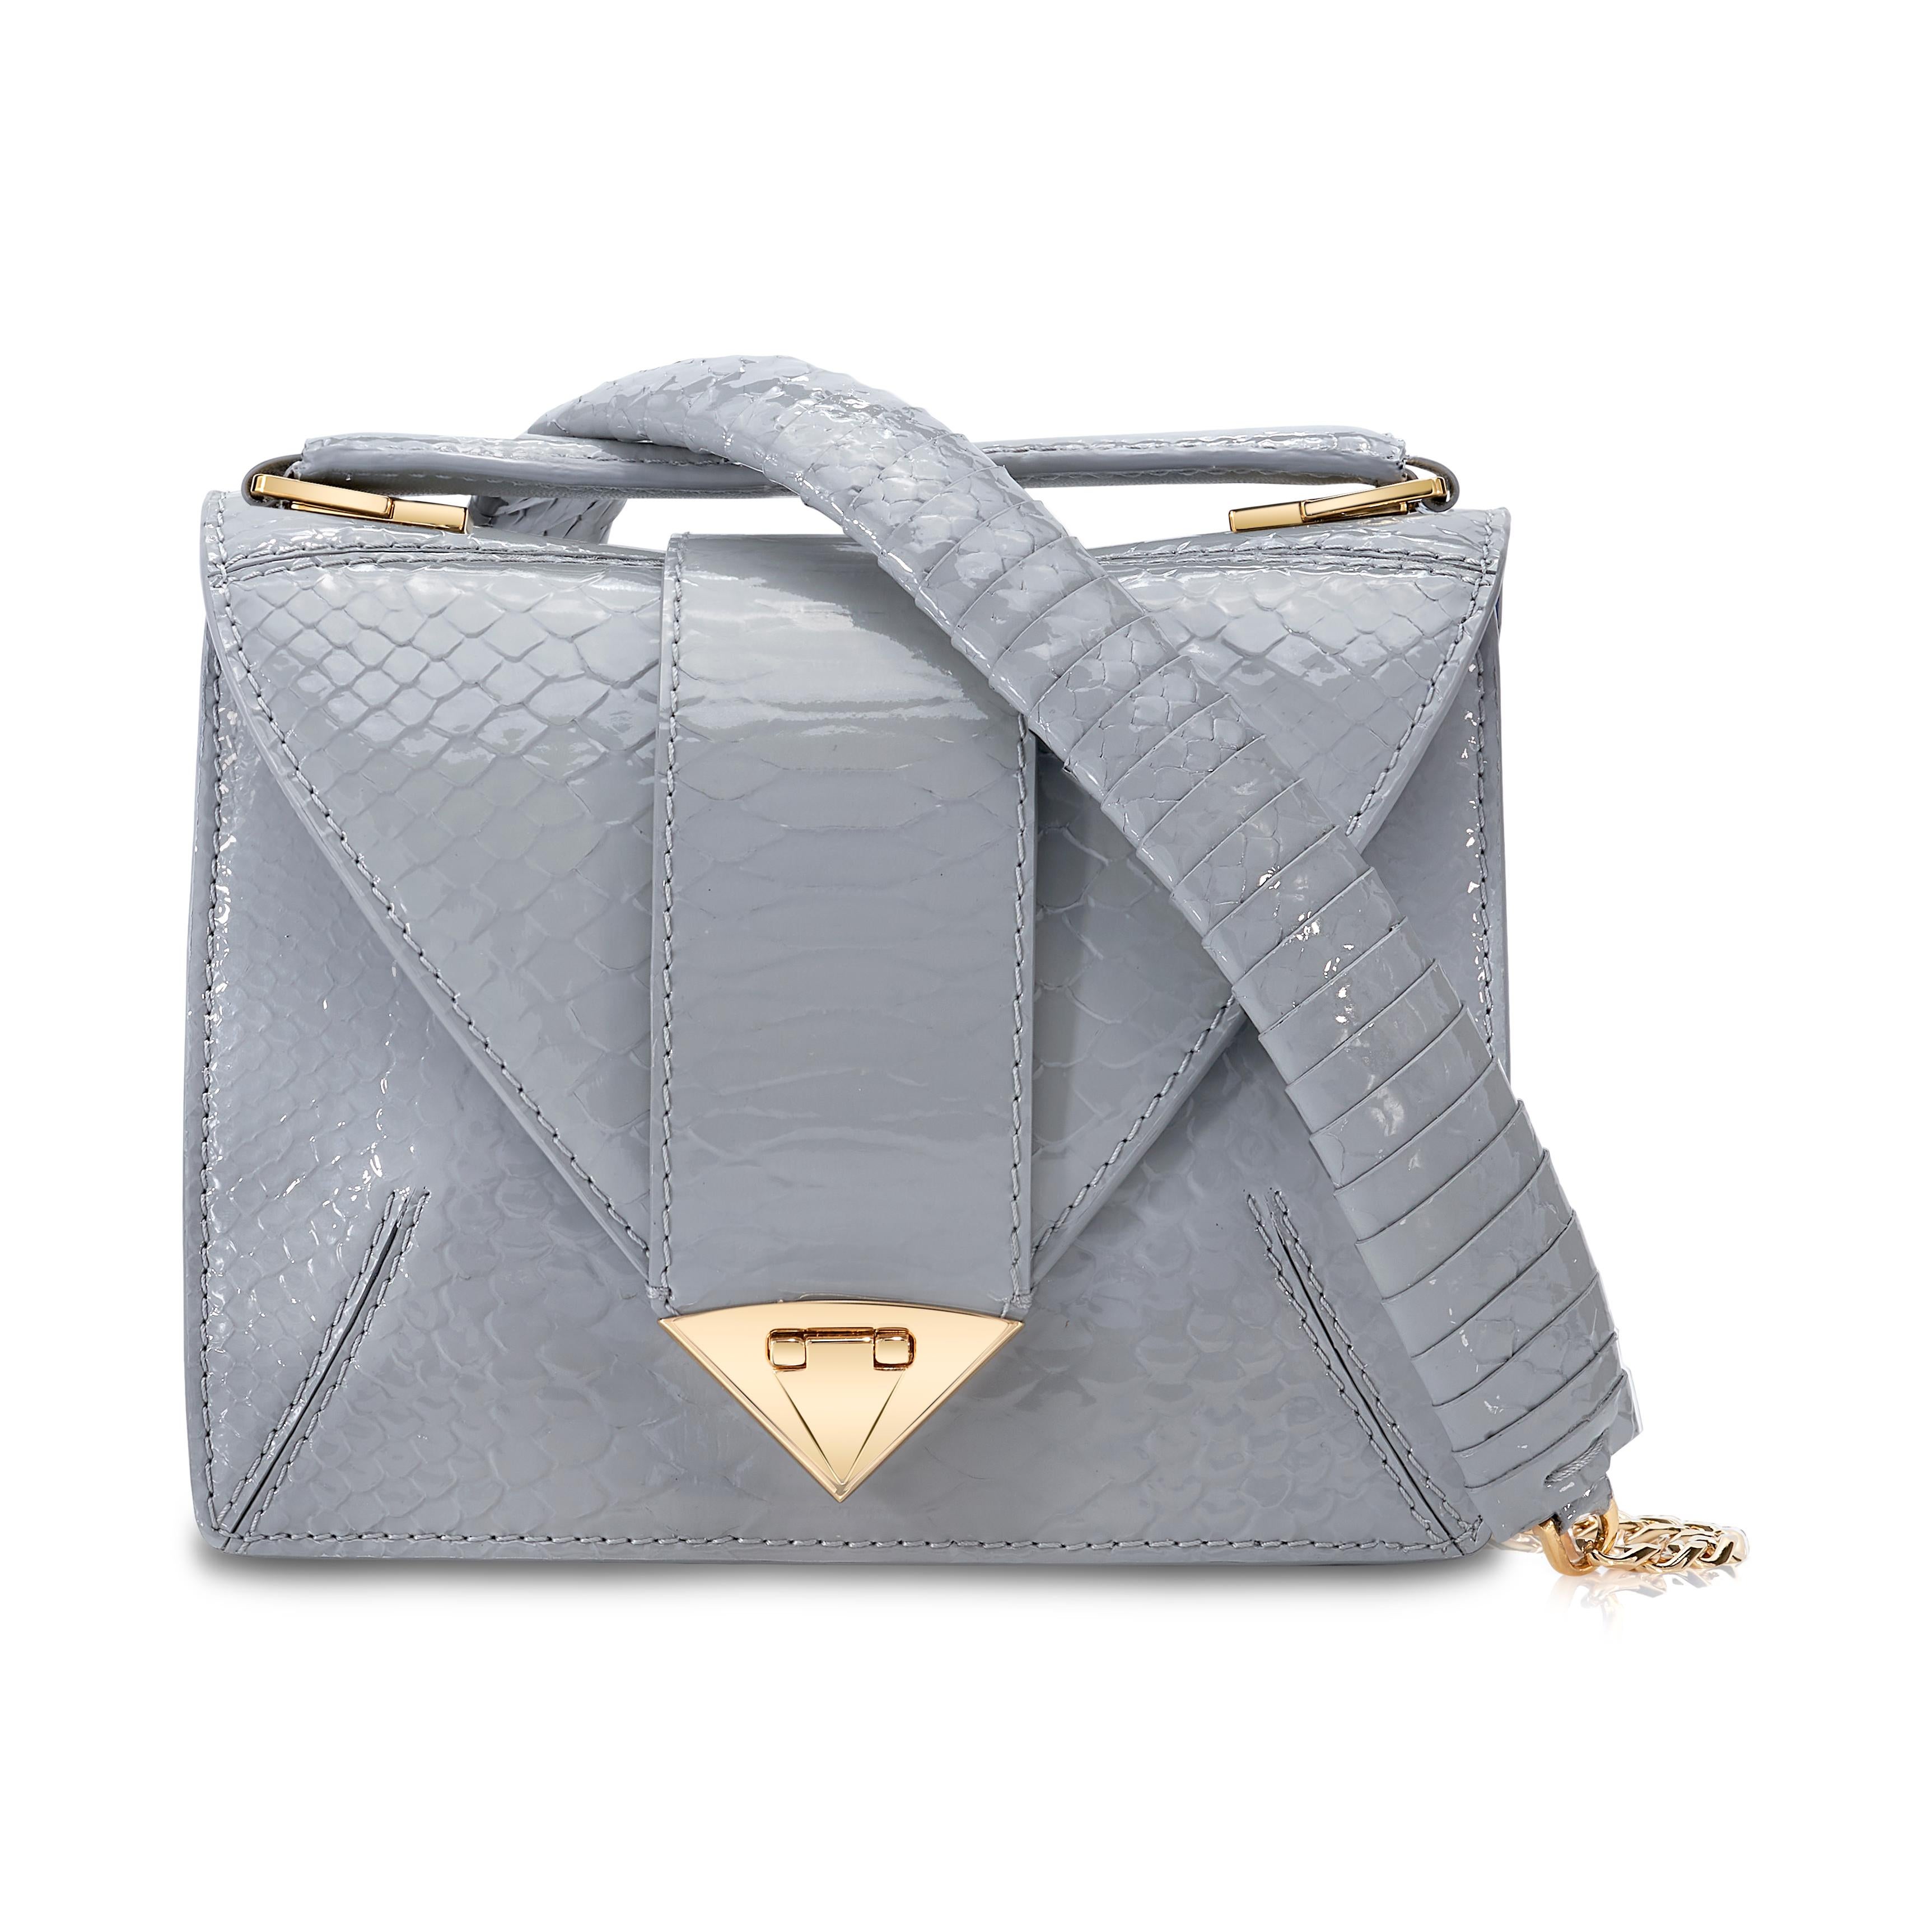 The Rita in Dove Grey Glossy Python is a semi-structured handbag with a triangular front flap finished with our custom Spear-lock Closure. It is designed with a flexible top handle and an optional gold chain with a python accent.  It fits the large